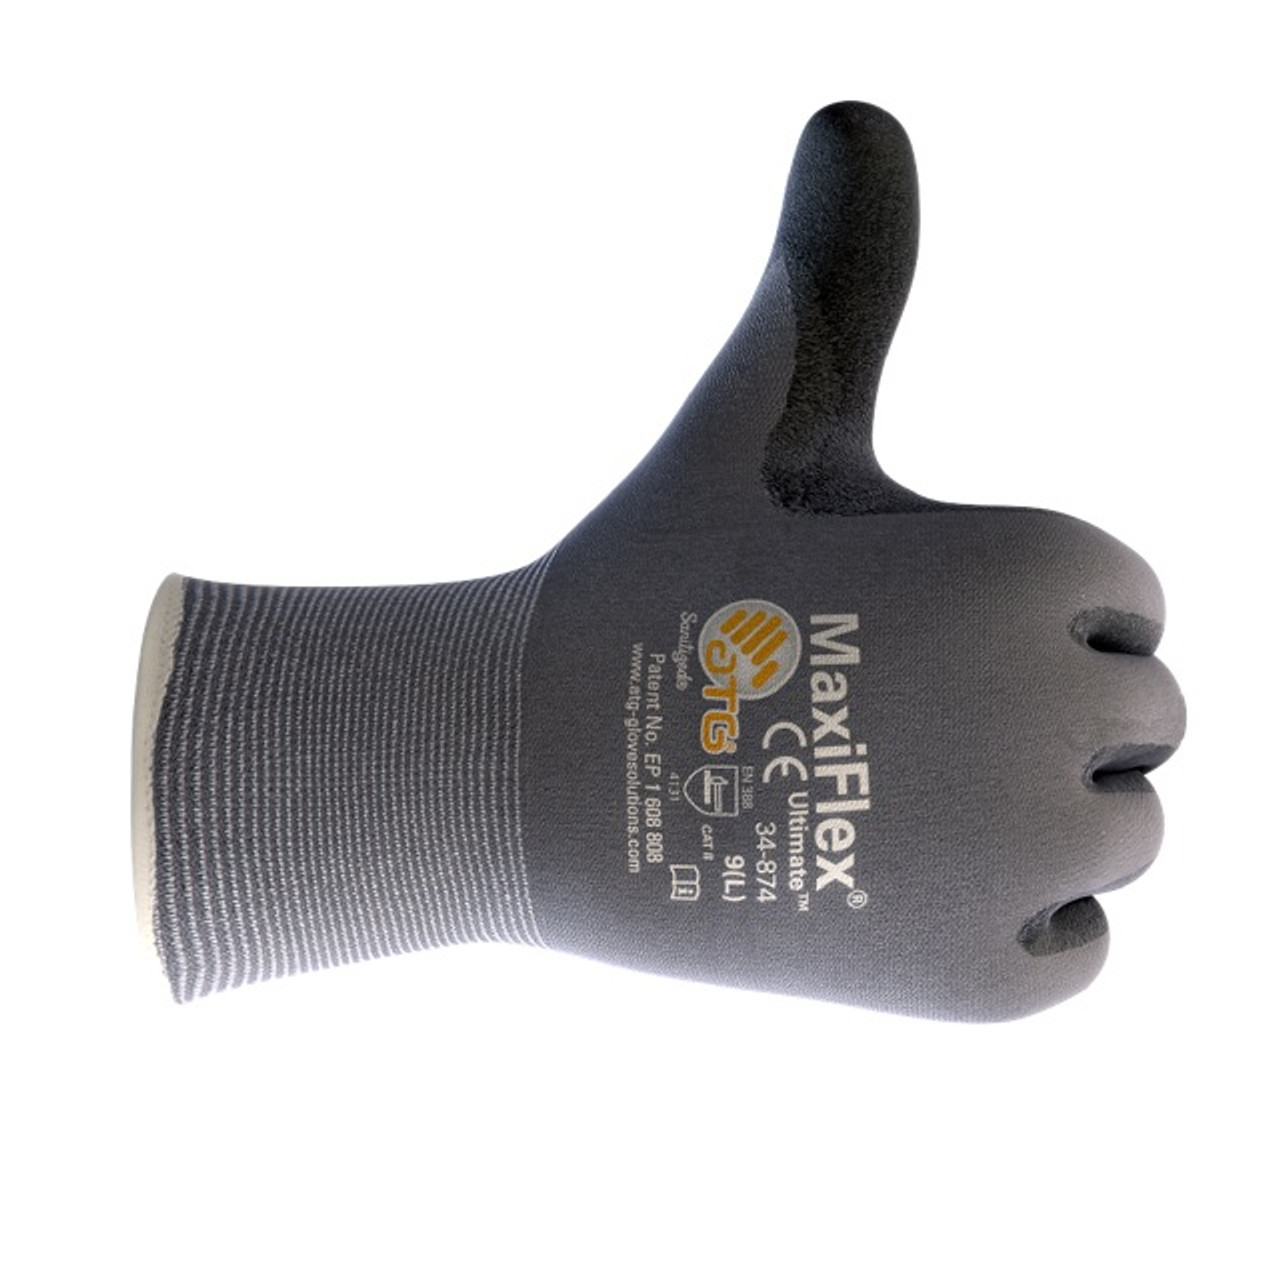 MaxiFlex 34-874 Nitrile-Coated Glove - Industrial Safety Products